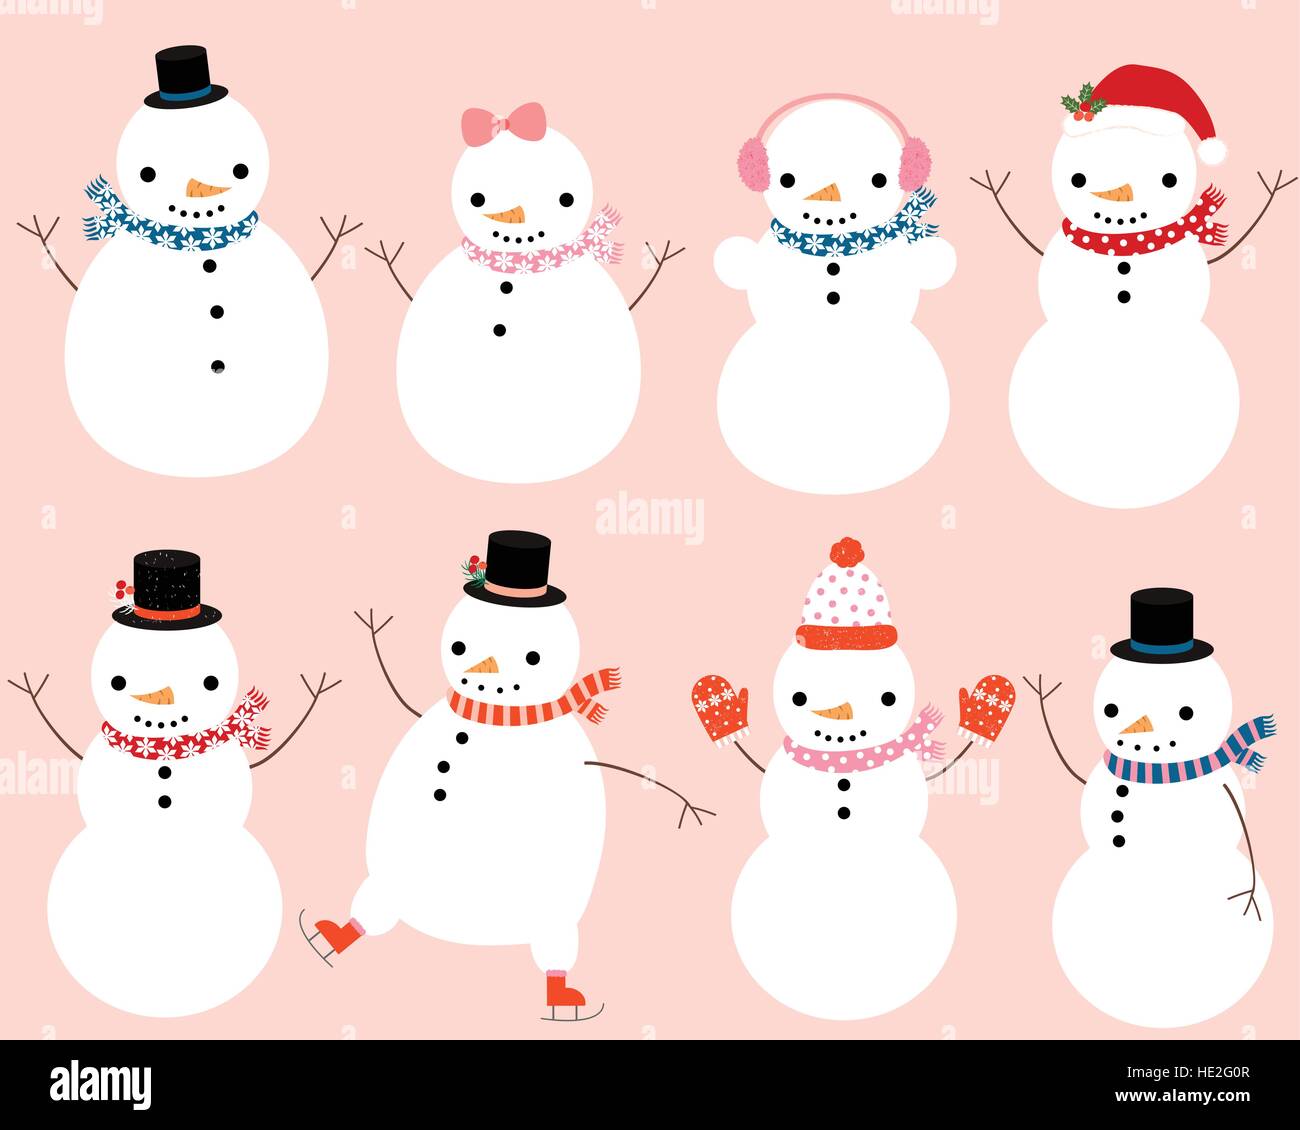 Cute snowman characters with winter scarves, hats and mittens for Christmas and New Year greeting cards and designs Stock Vector